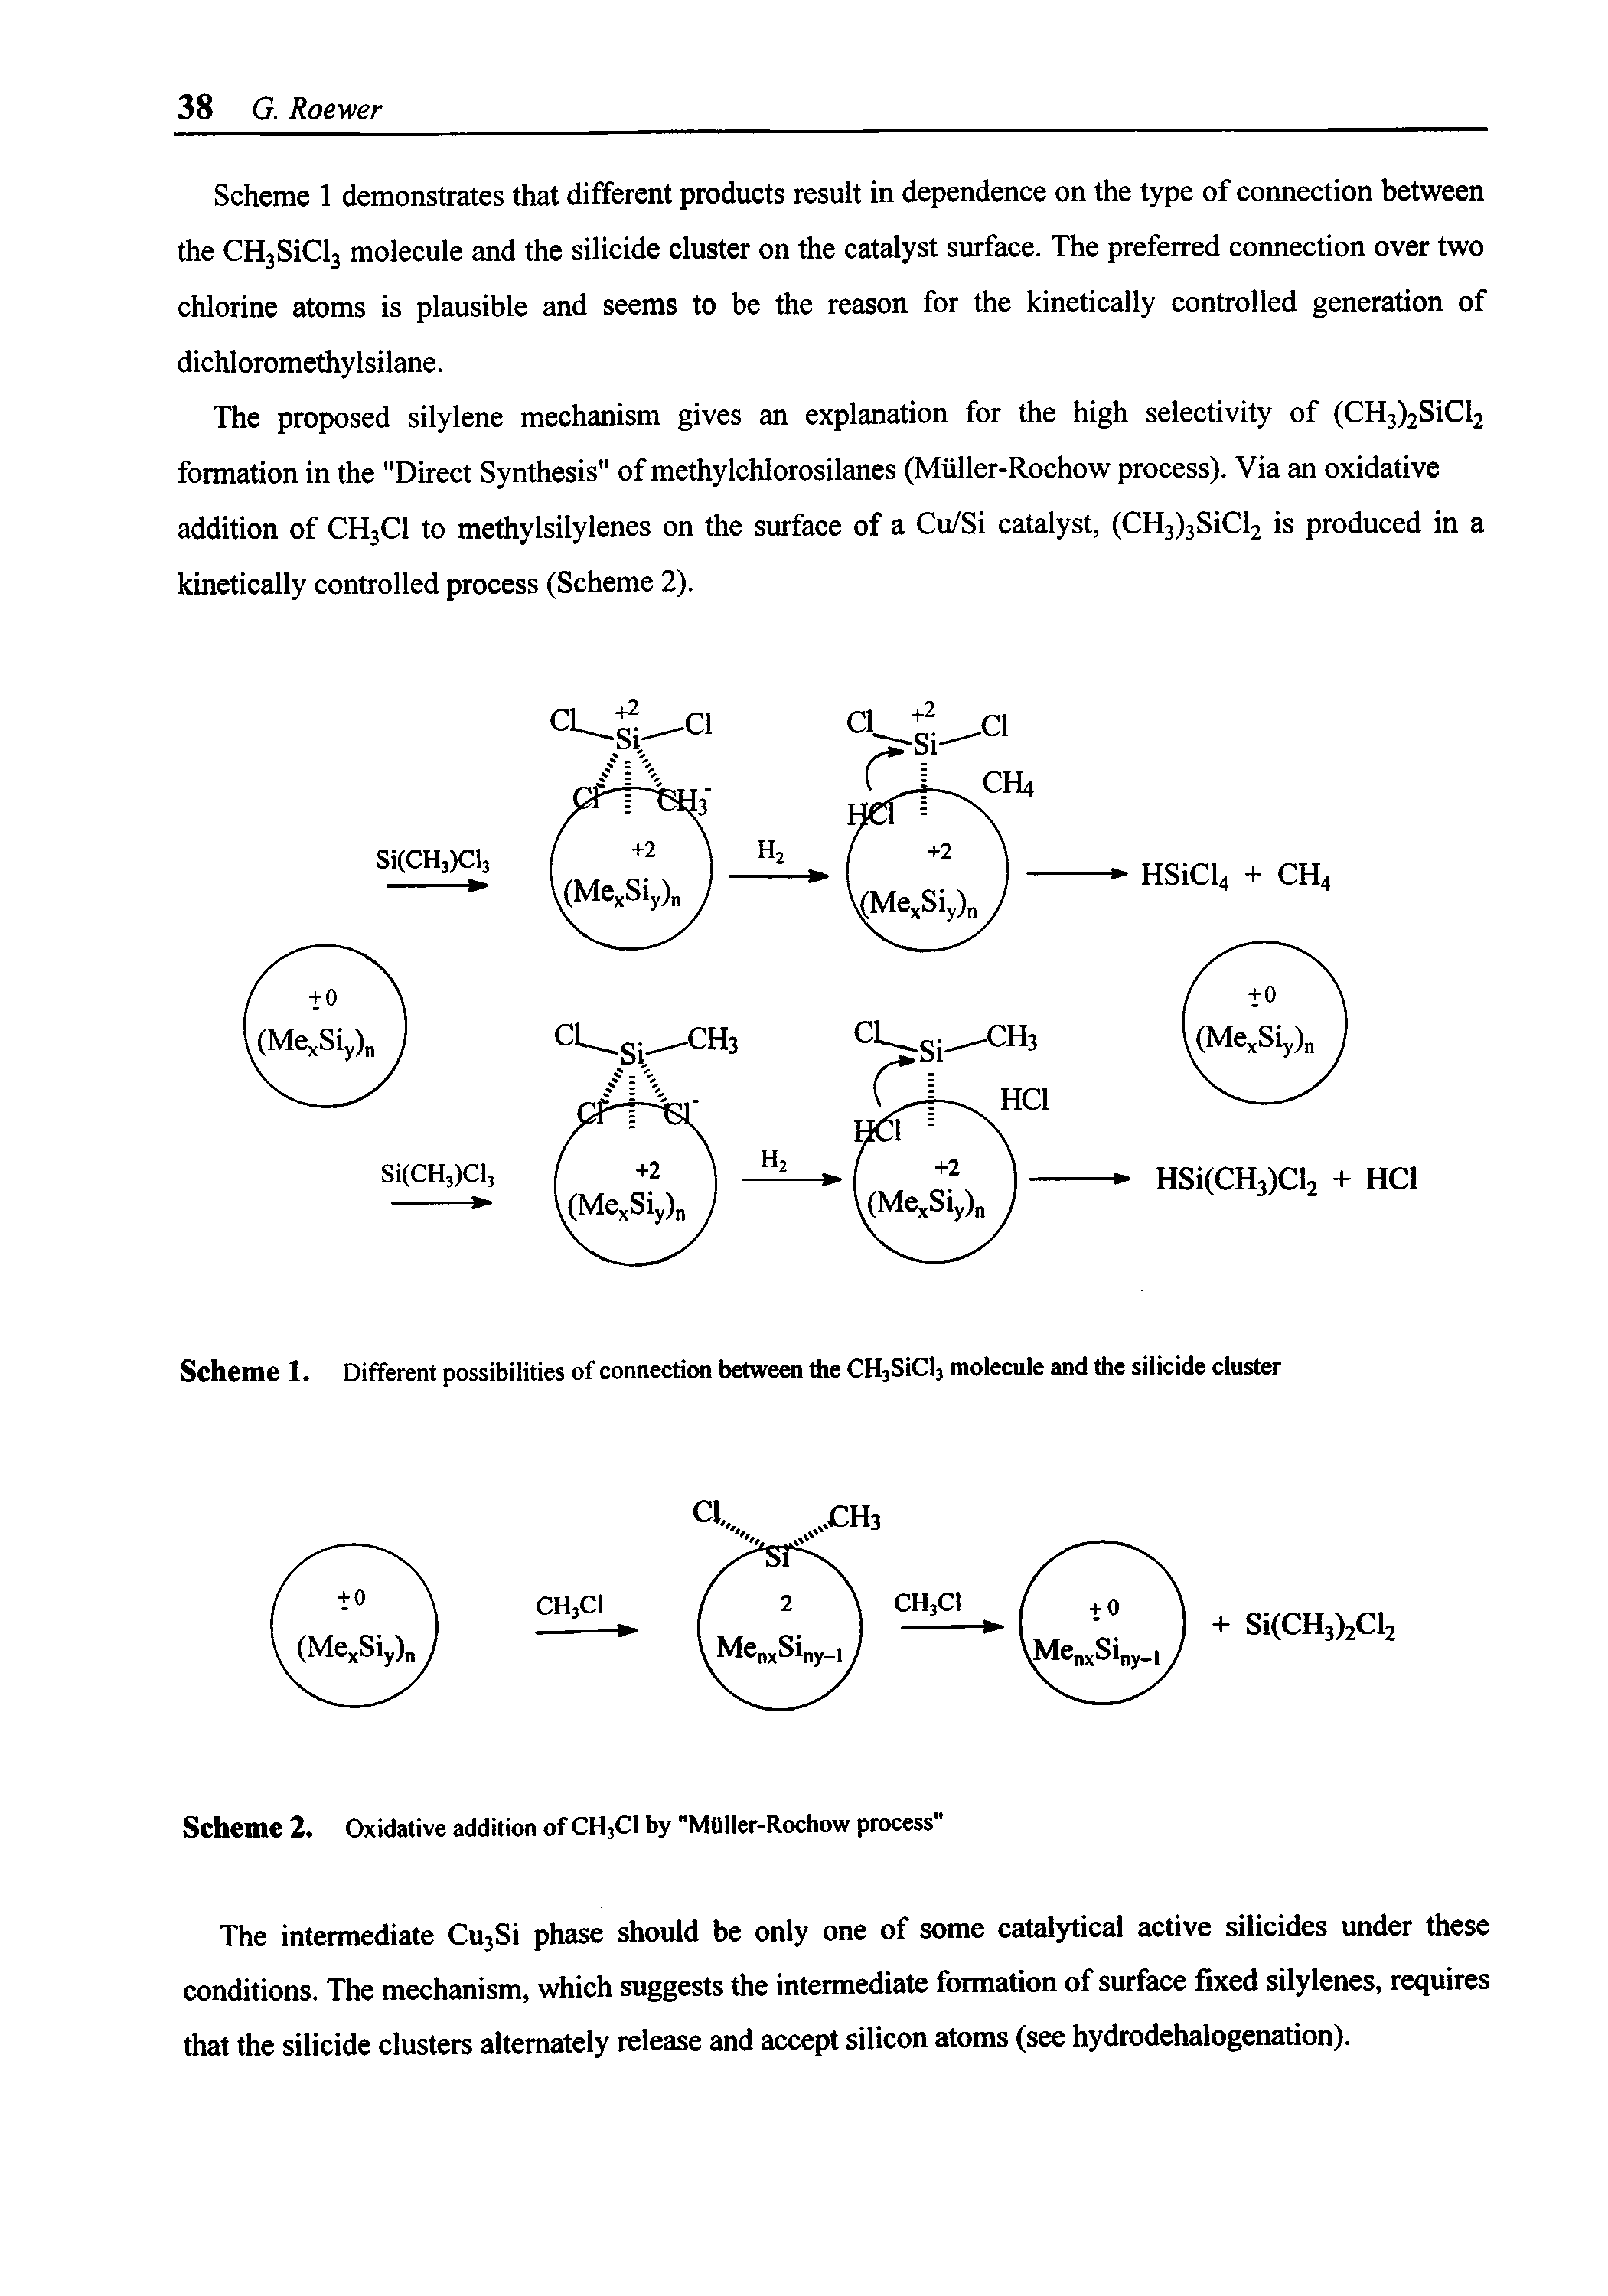 Scheme 2. Oxidative addition of CH3CI by "MOIIer-Rochow process"...